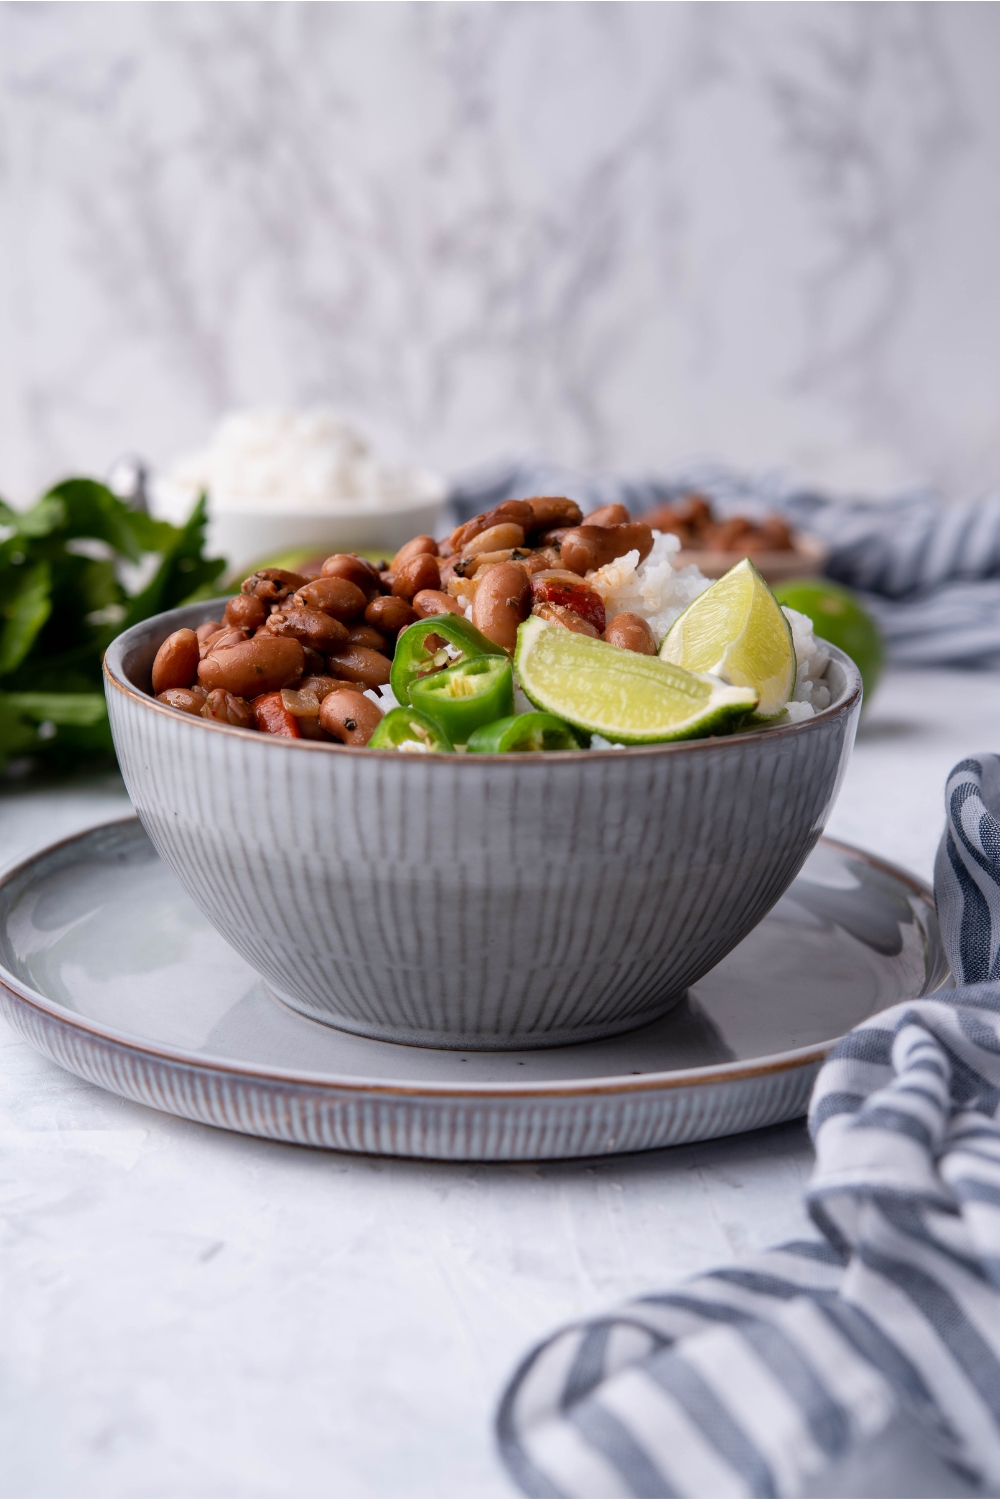 A grey bowl atop a grey plate filled with pinto beans and white rice, garnished with lime wedges and sliced peppers.